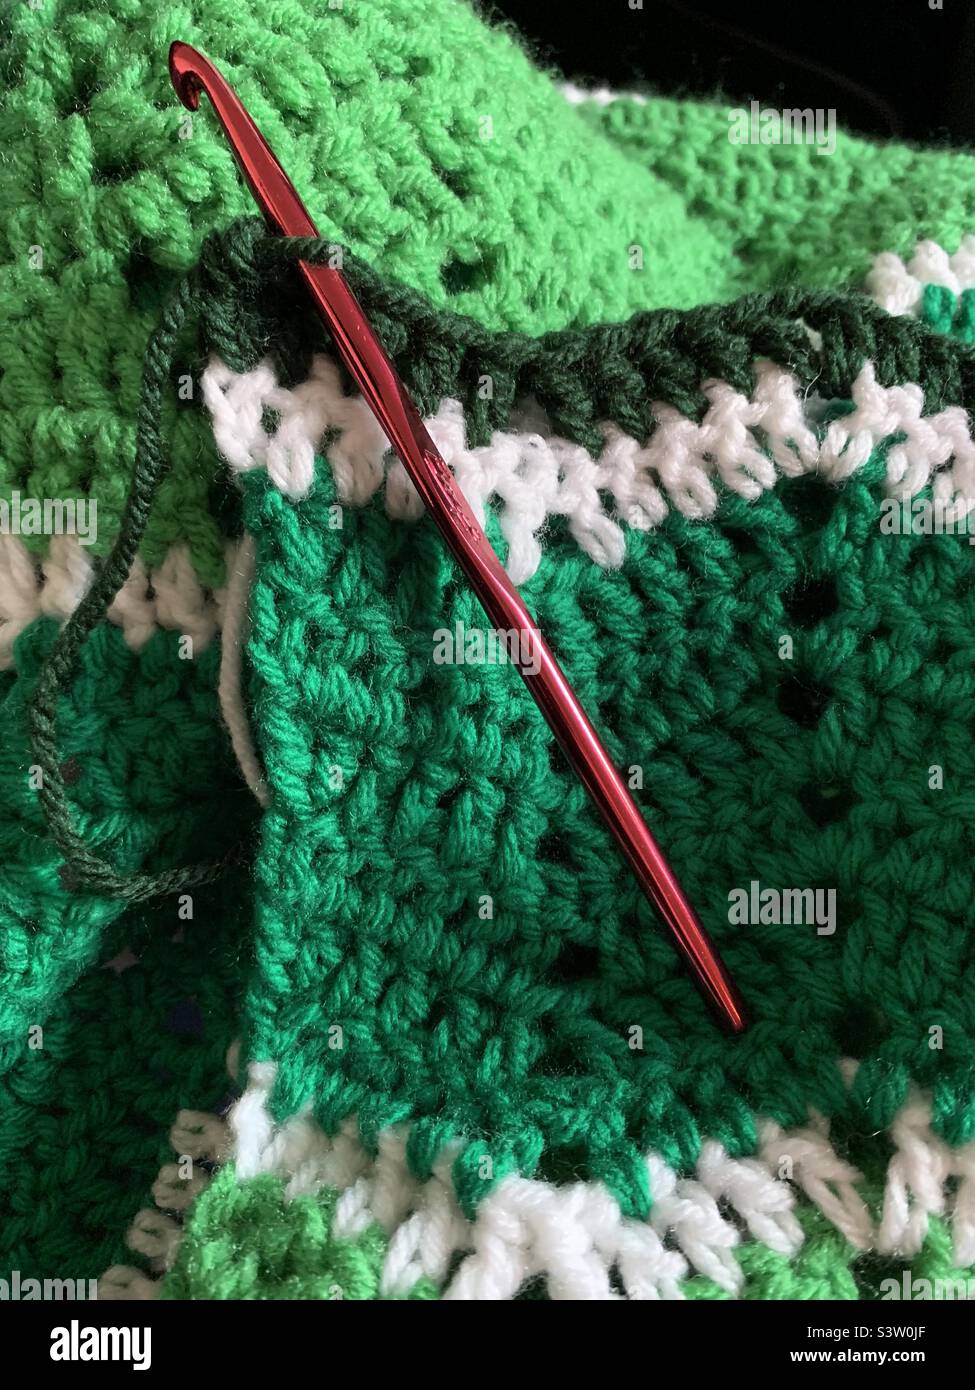 Red aluminum crochet hook with green and white crocheted chevron pattern blanket Stock Photo